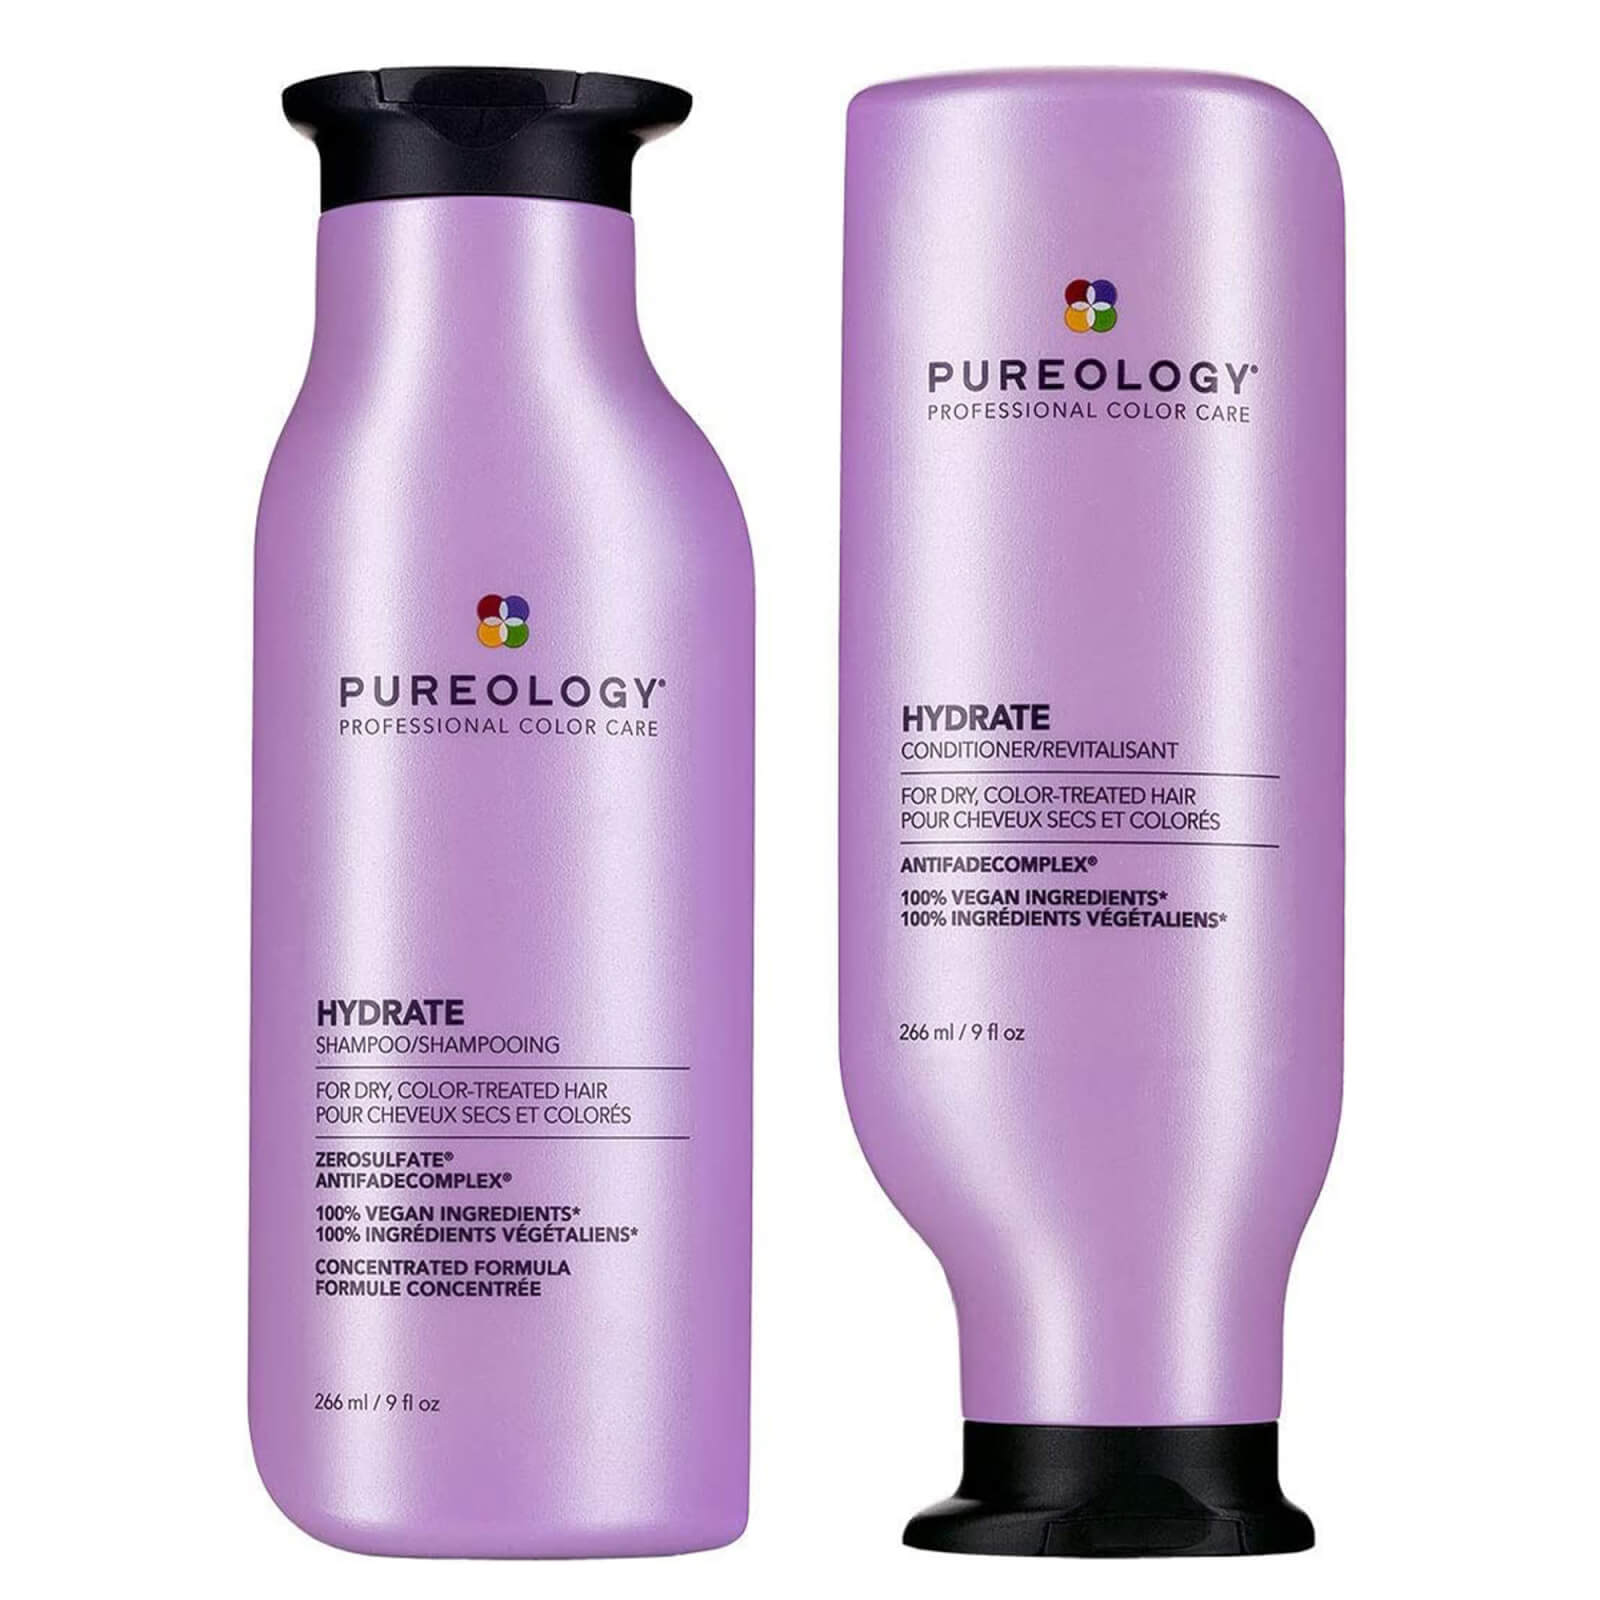 Image of Pureology Hydrate Shampoo and Conditioner Moisturising Bundle for Dry Hair, Sulphate Free for a Gentle Cleanse